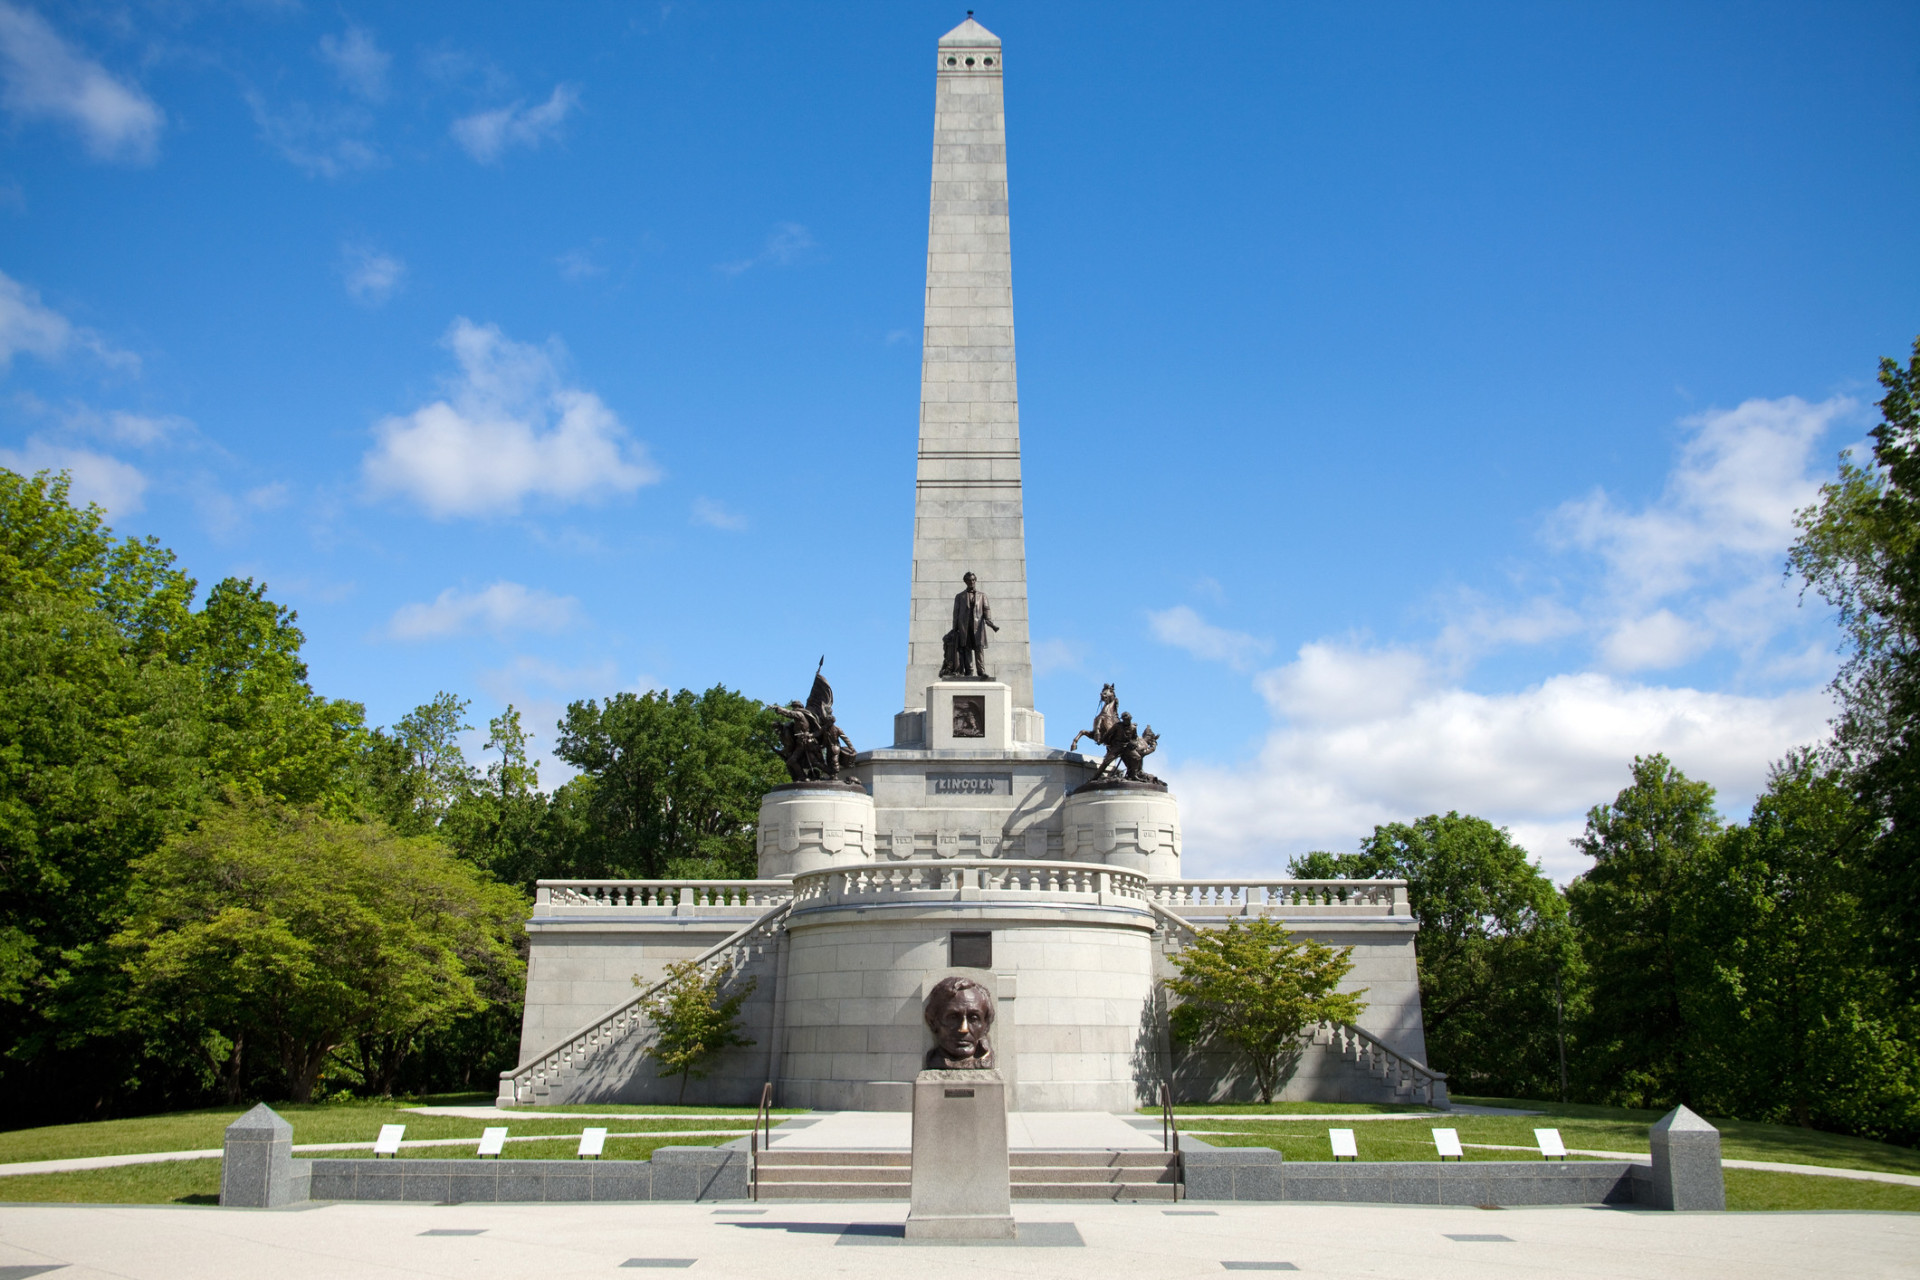 A stunning monument, the Lincoln Tomb is the final resting place of one of the country's greatest presidents. A bust, cast in bronze, announces the burial chamber. Be sure to rub the great man's nose for good luck!<p>You may also like:<a href="https://www.starsinsider.com/n/394213?utm_source=msn.com&utm_medium=display&utm_campaign=referral_description&utm_content=198095v22en-en"> Signs that you are in a toxic relationship</a></p>